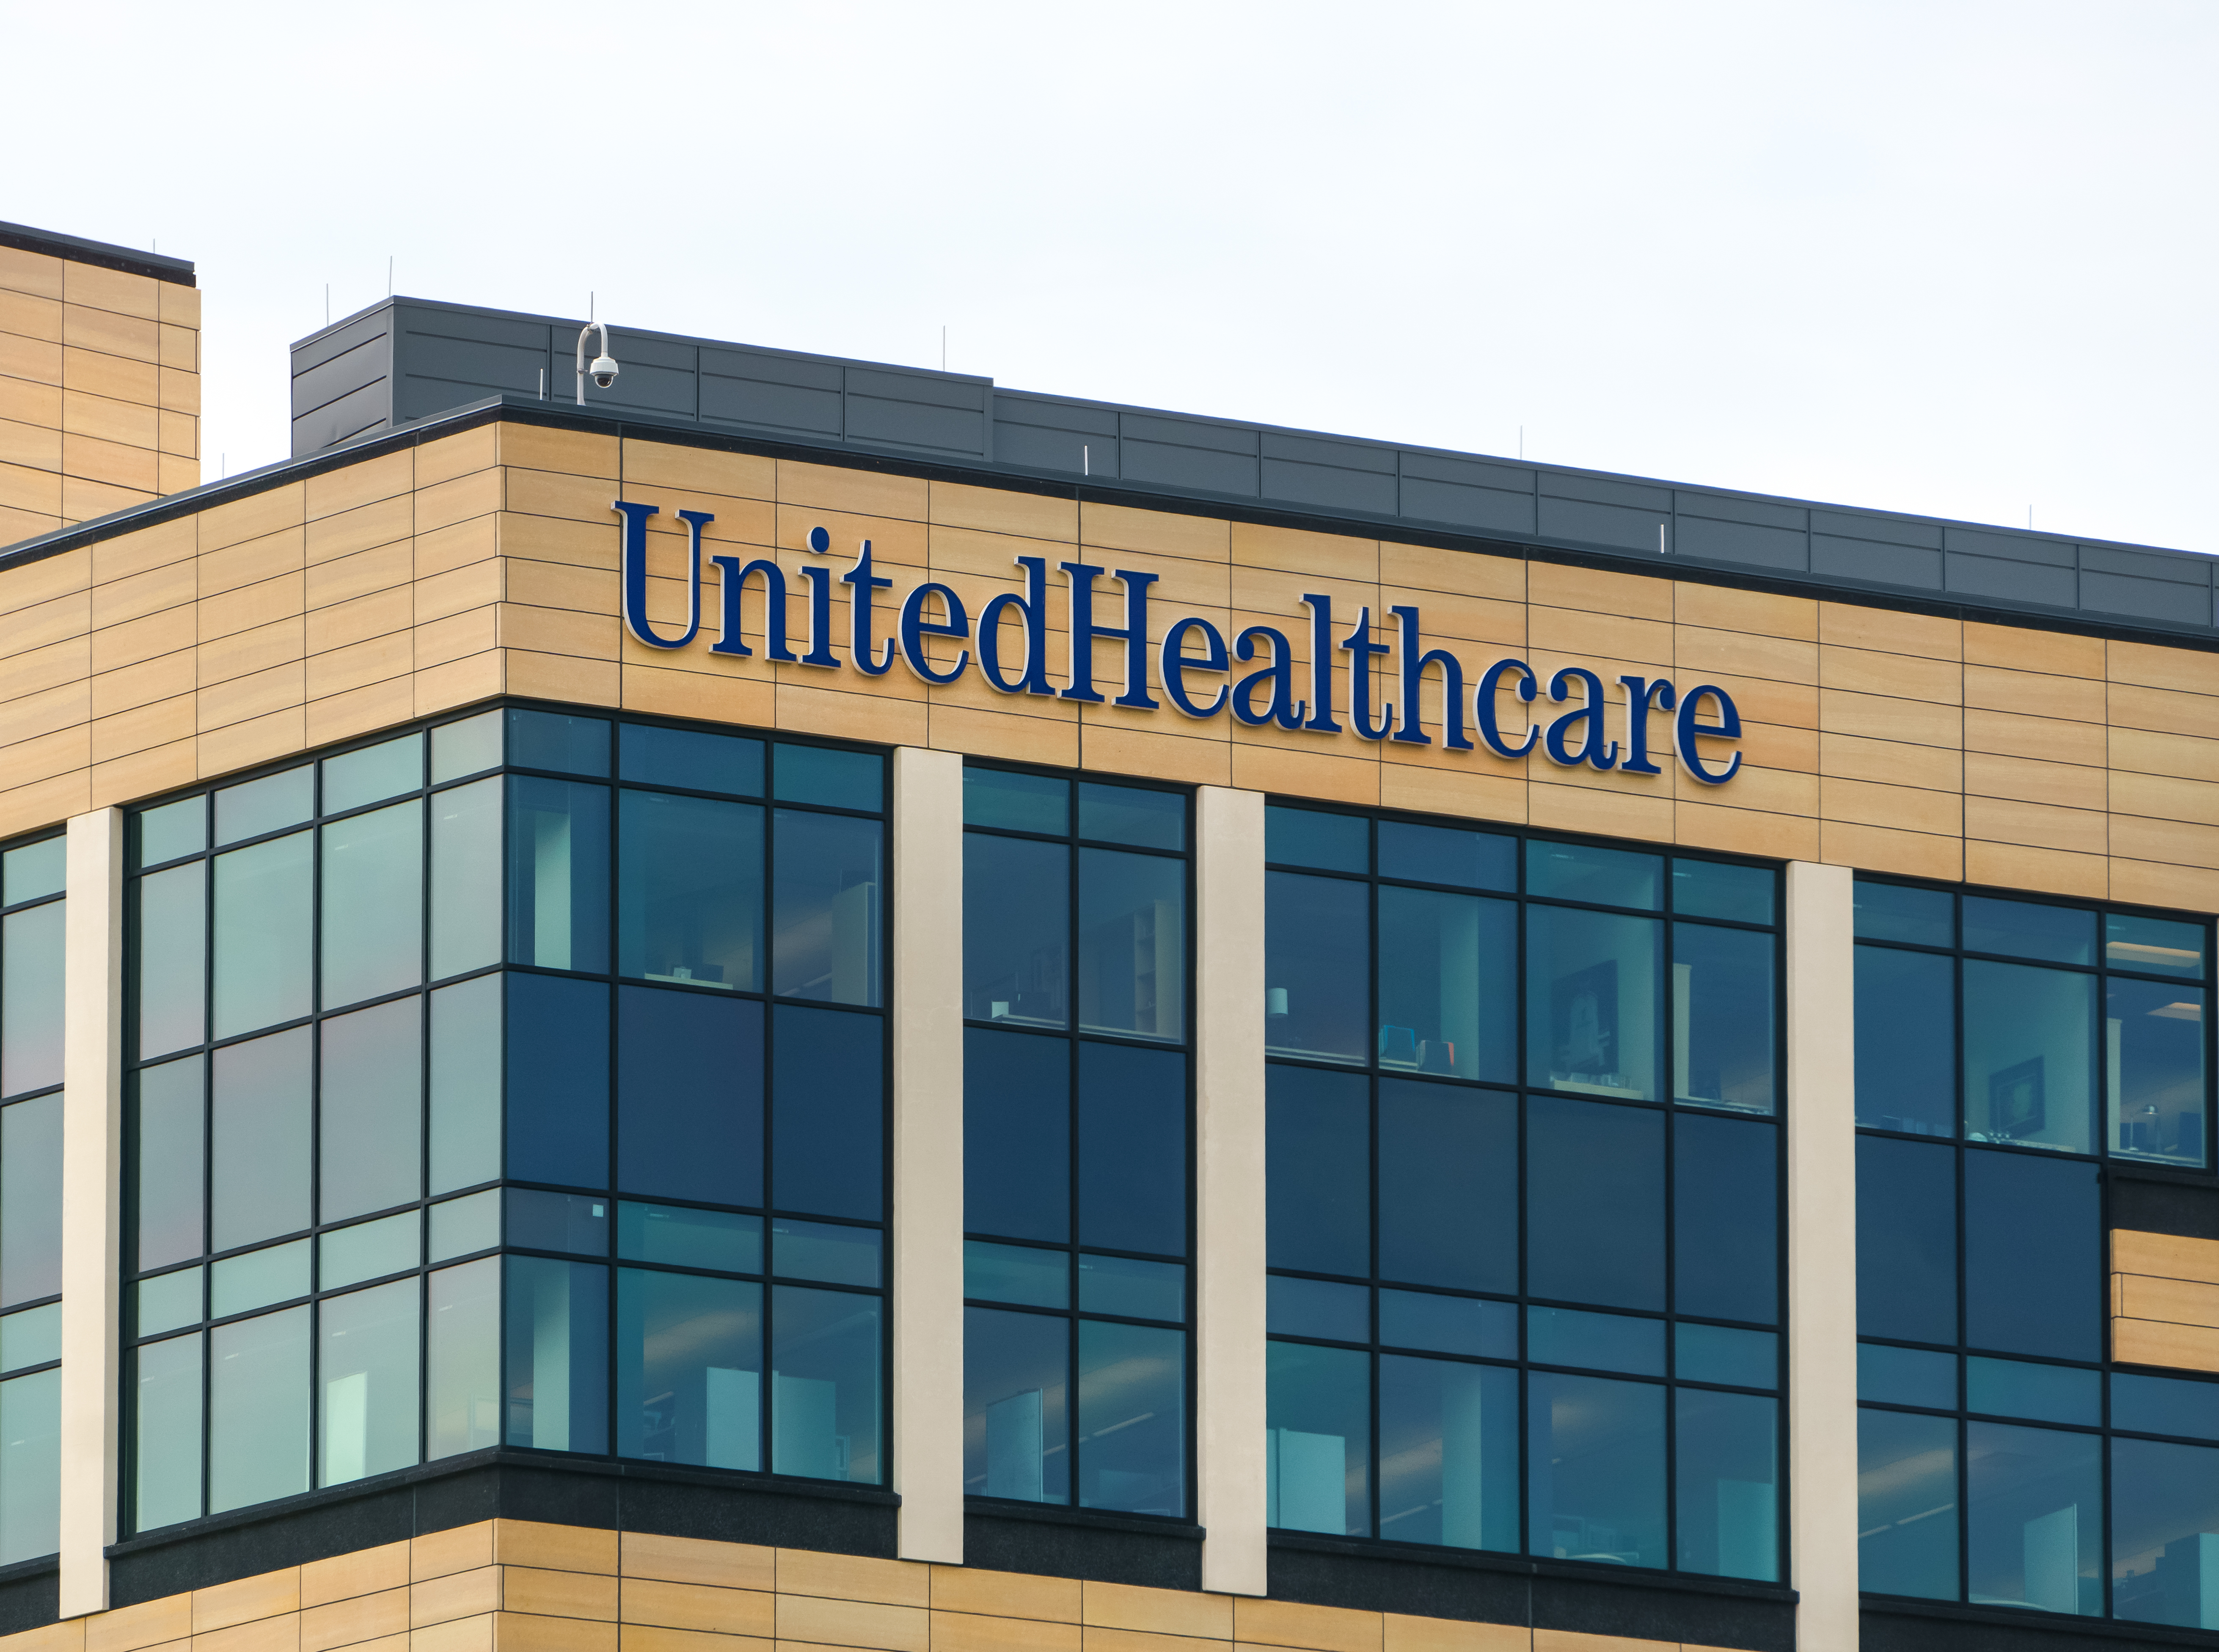 The UnitedHealth Group headquarters building is located in Minnetonka, Minnesota. August 13, 2015. Shutterstock image via Ken Wolter